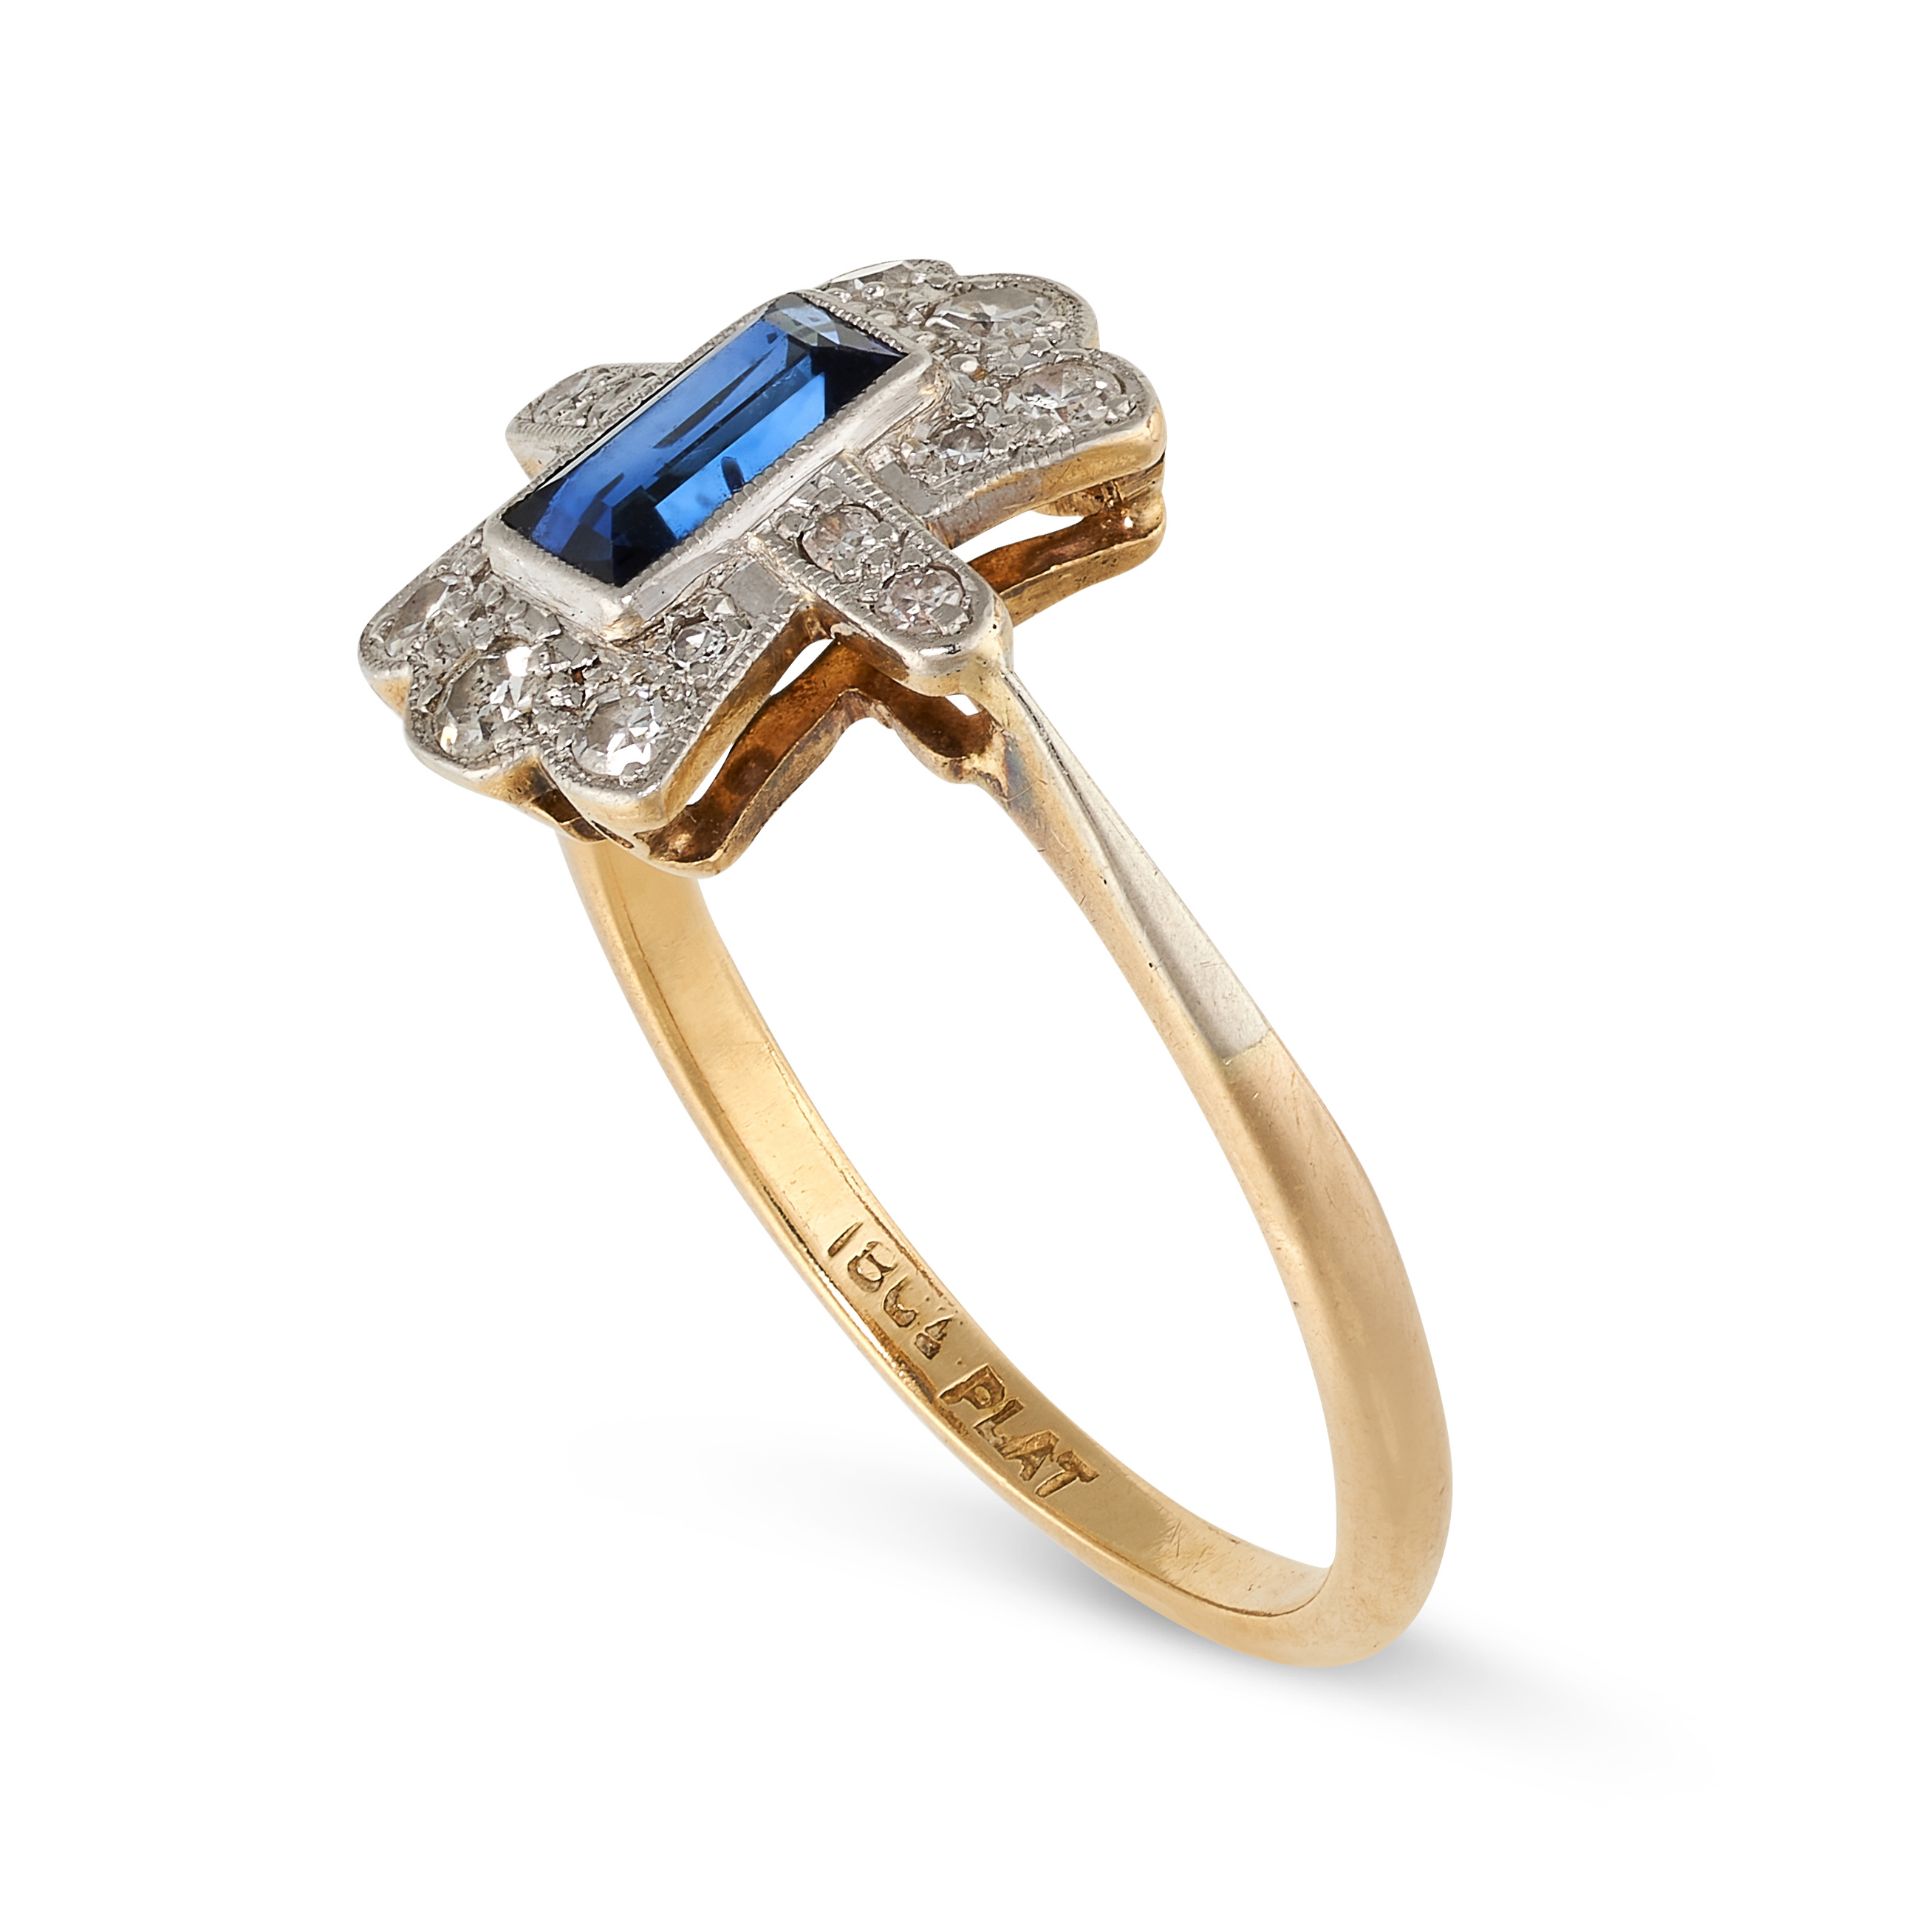 NO RESERVE - A SAPPHIRE AND DIAMOND DRESS RING in 18ct yellow gold and platinum, set with a baguette - Image 2 of 2